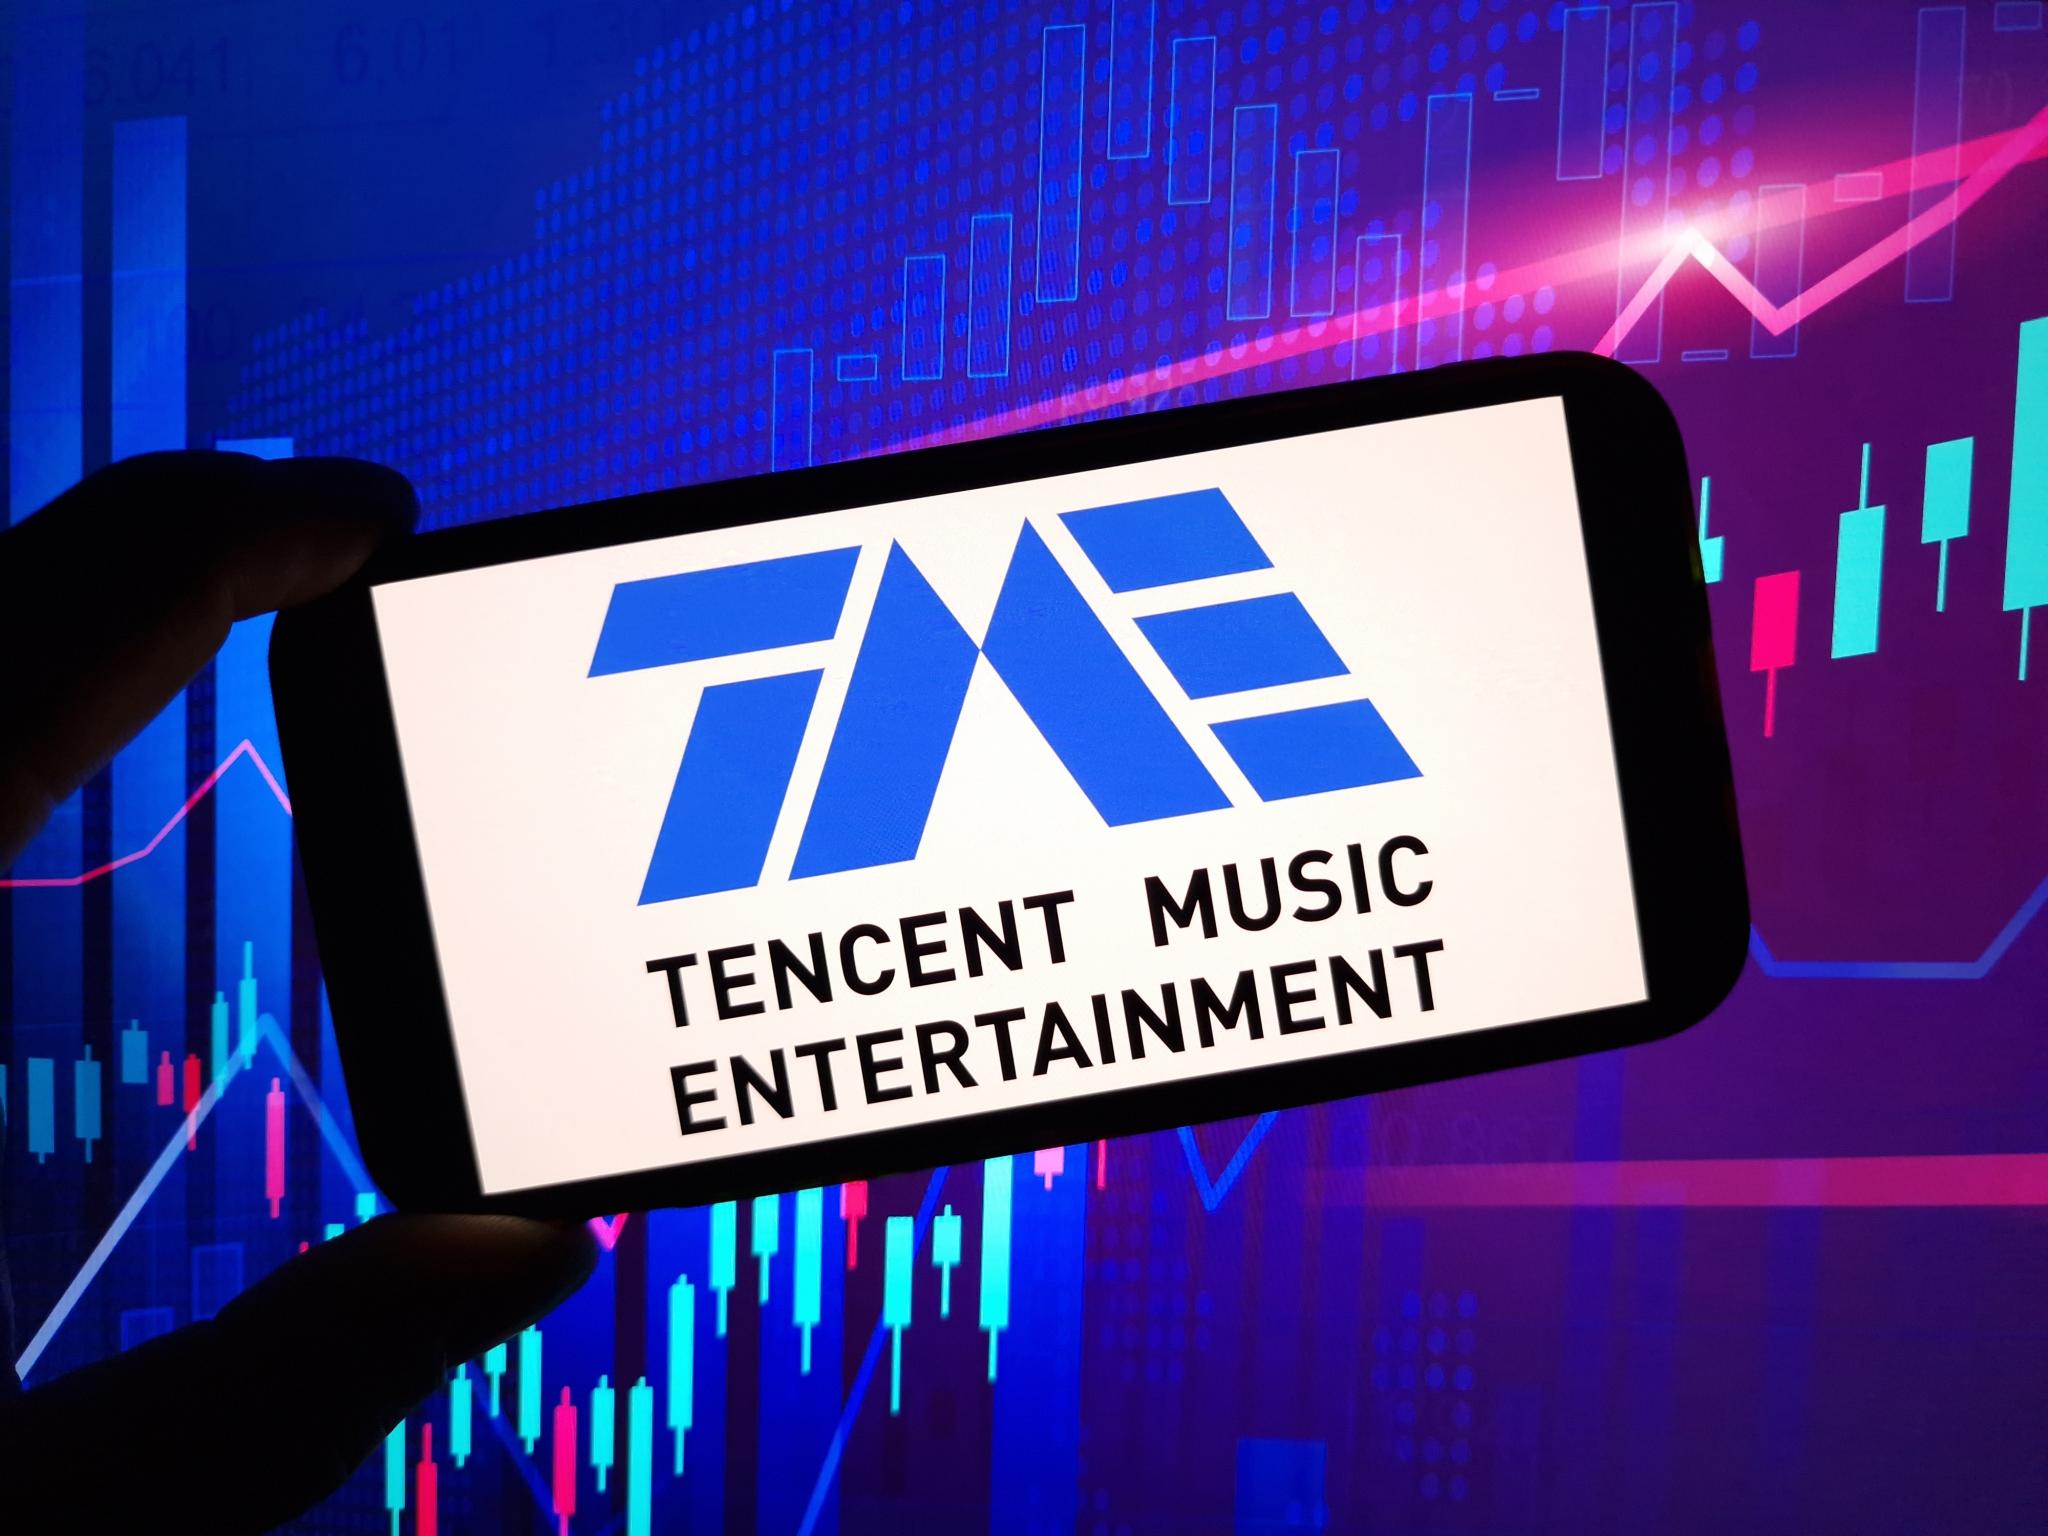  tencent-music-entertainment-ready-to-benefit-from-secular-tailwind-of-music-streaming-adoption-analysts-on-q4-results-outlook 